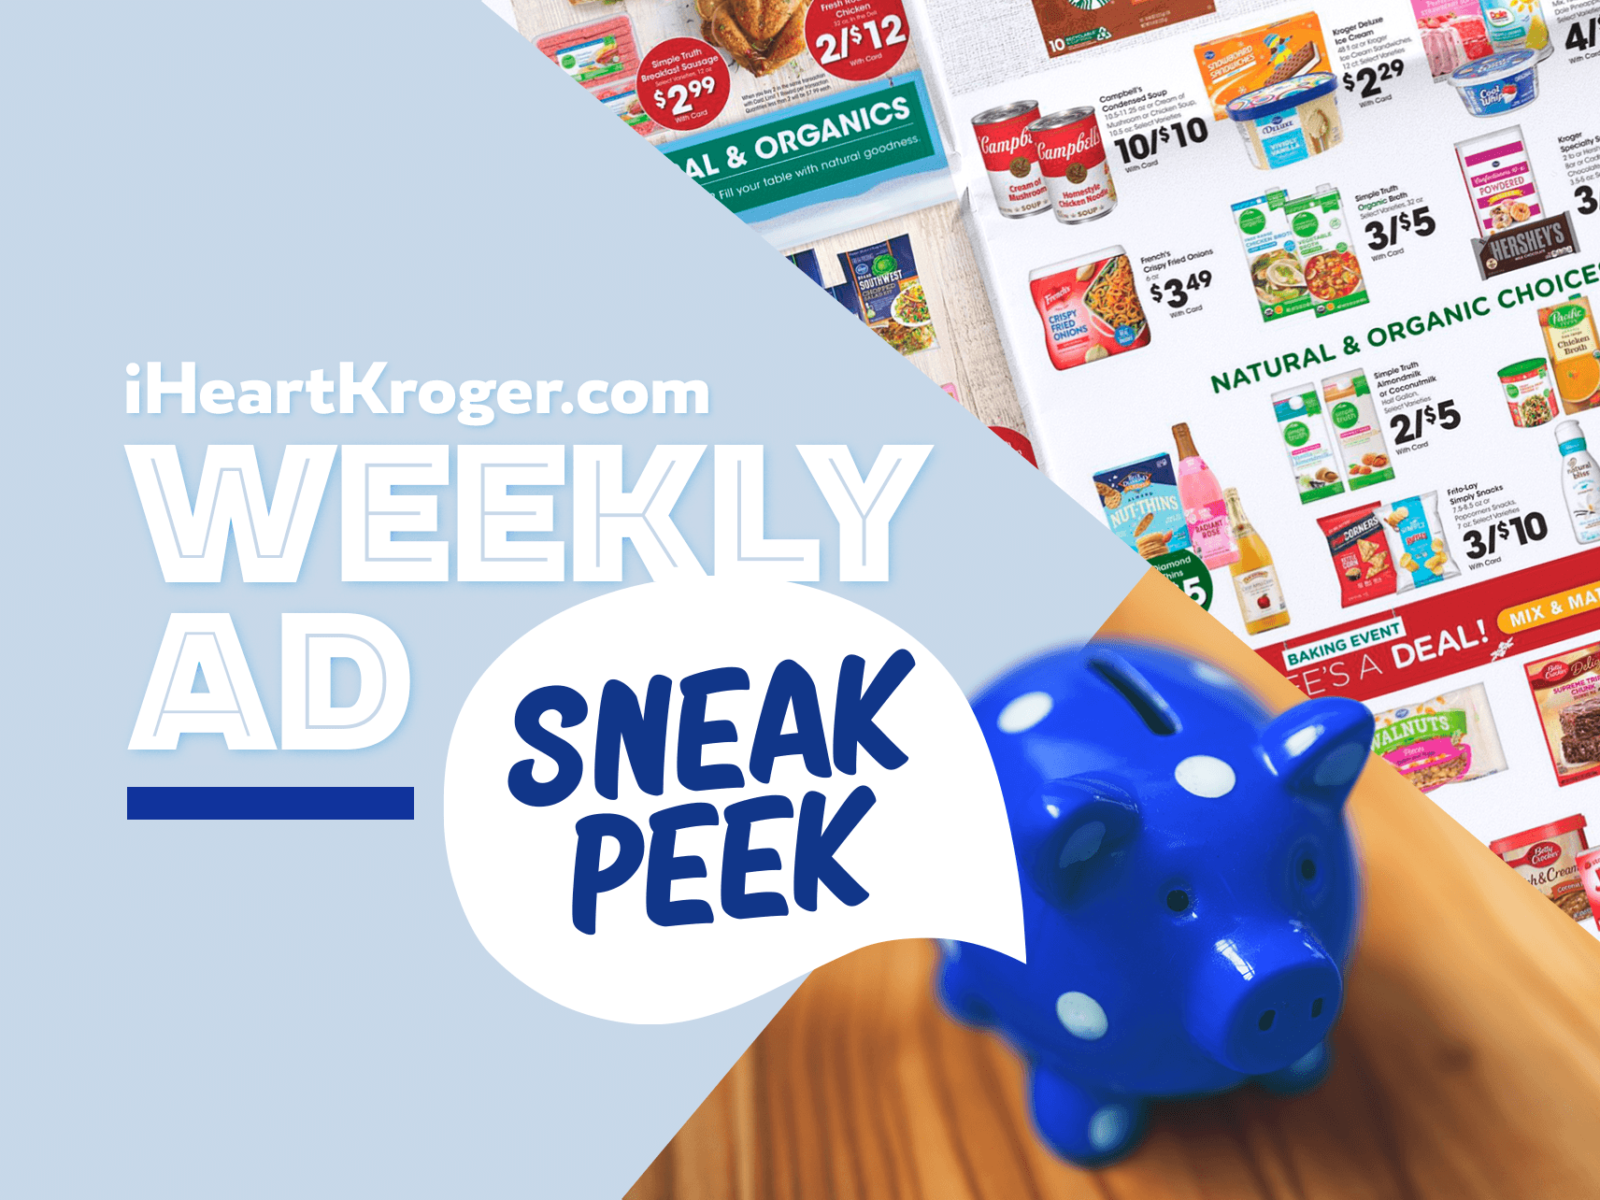 Kroger Ad & Coupons Week Of 6/8 to 6/14